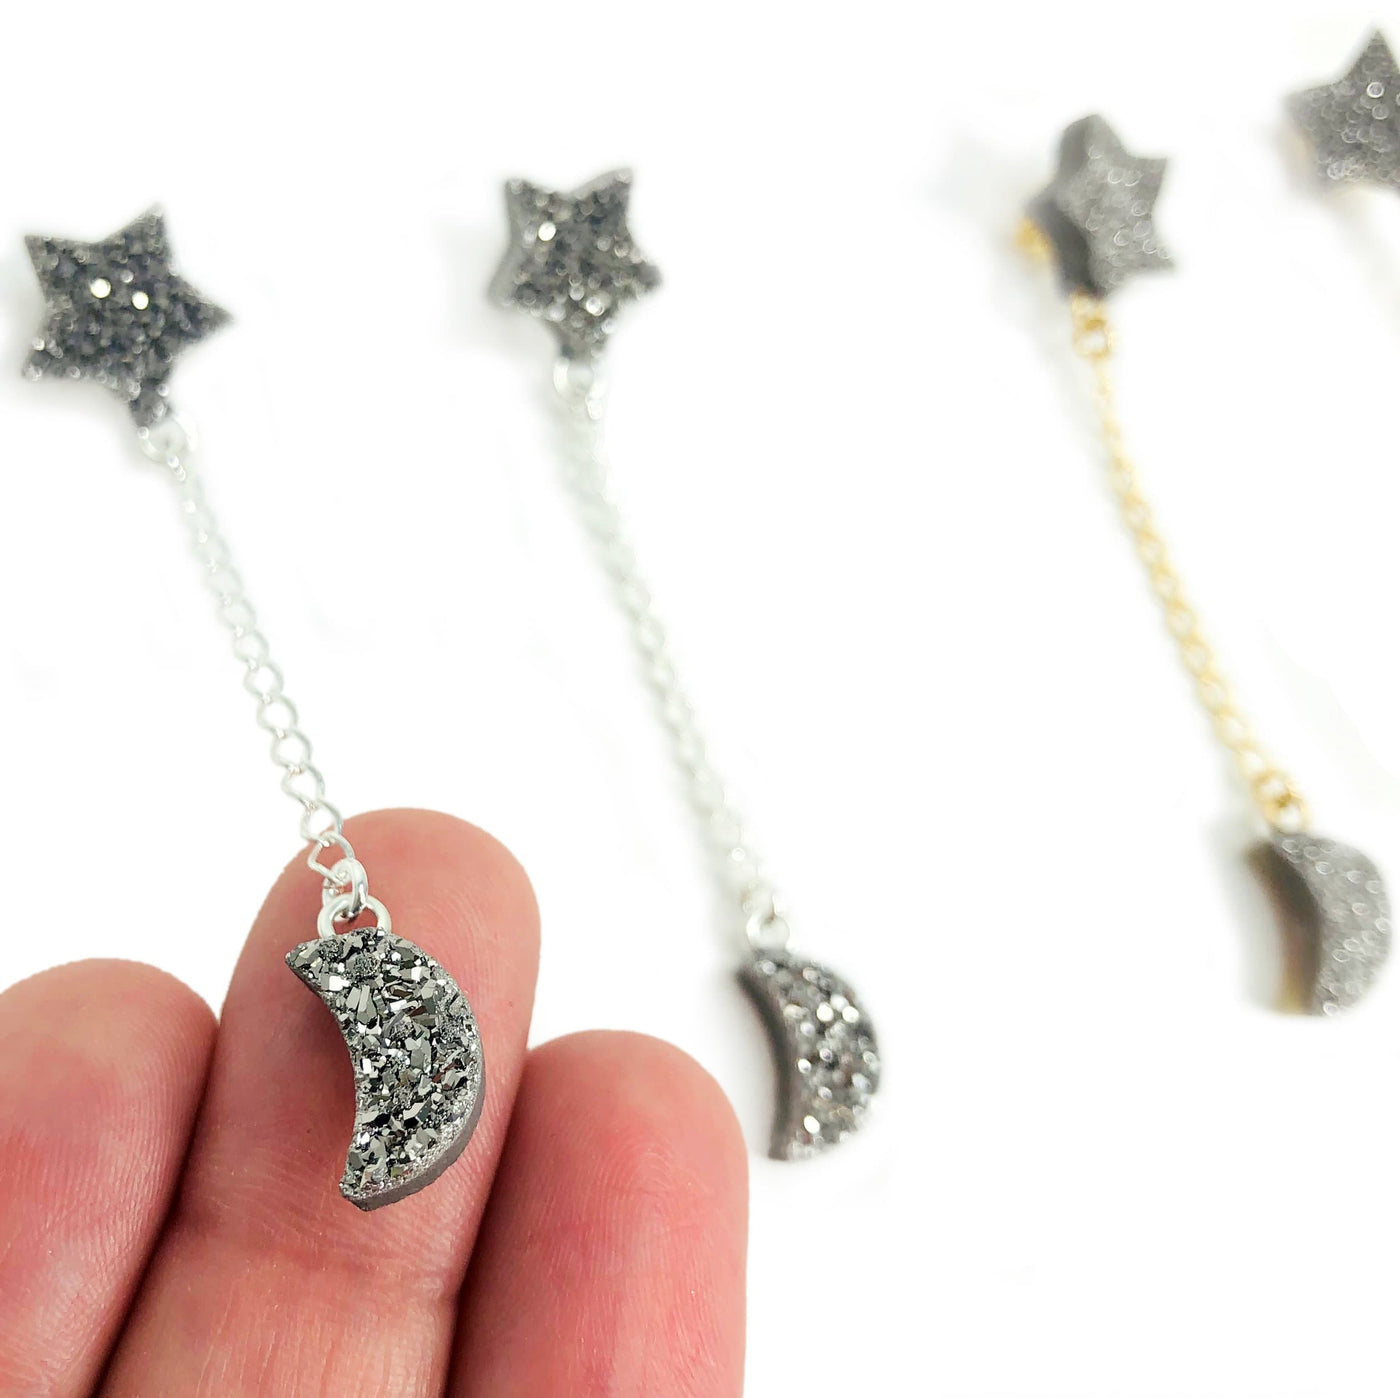 Star and Moon Titanium Druzy Dangling Earrings - by a hand